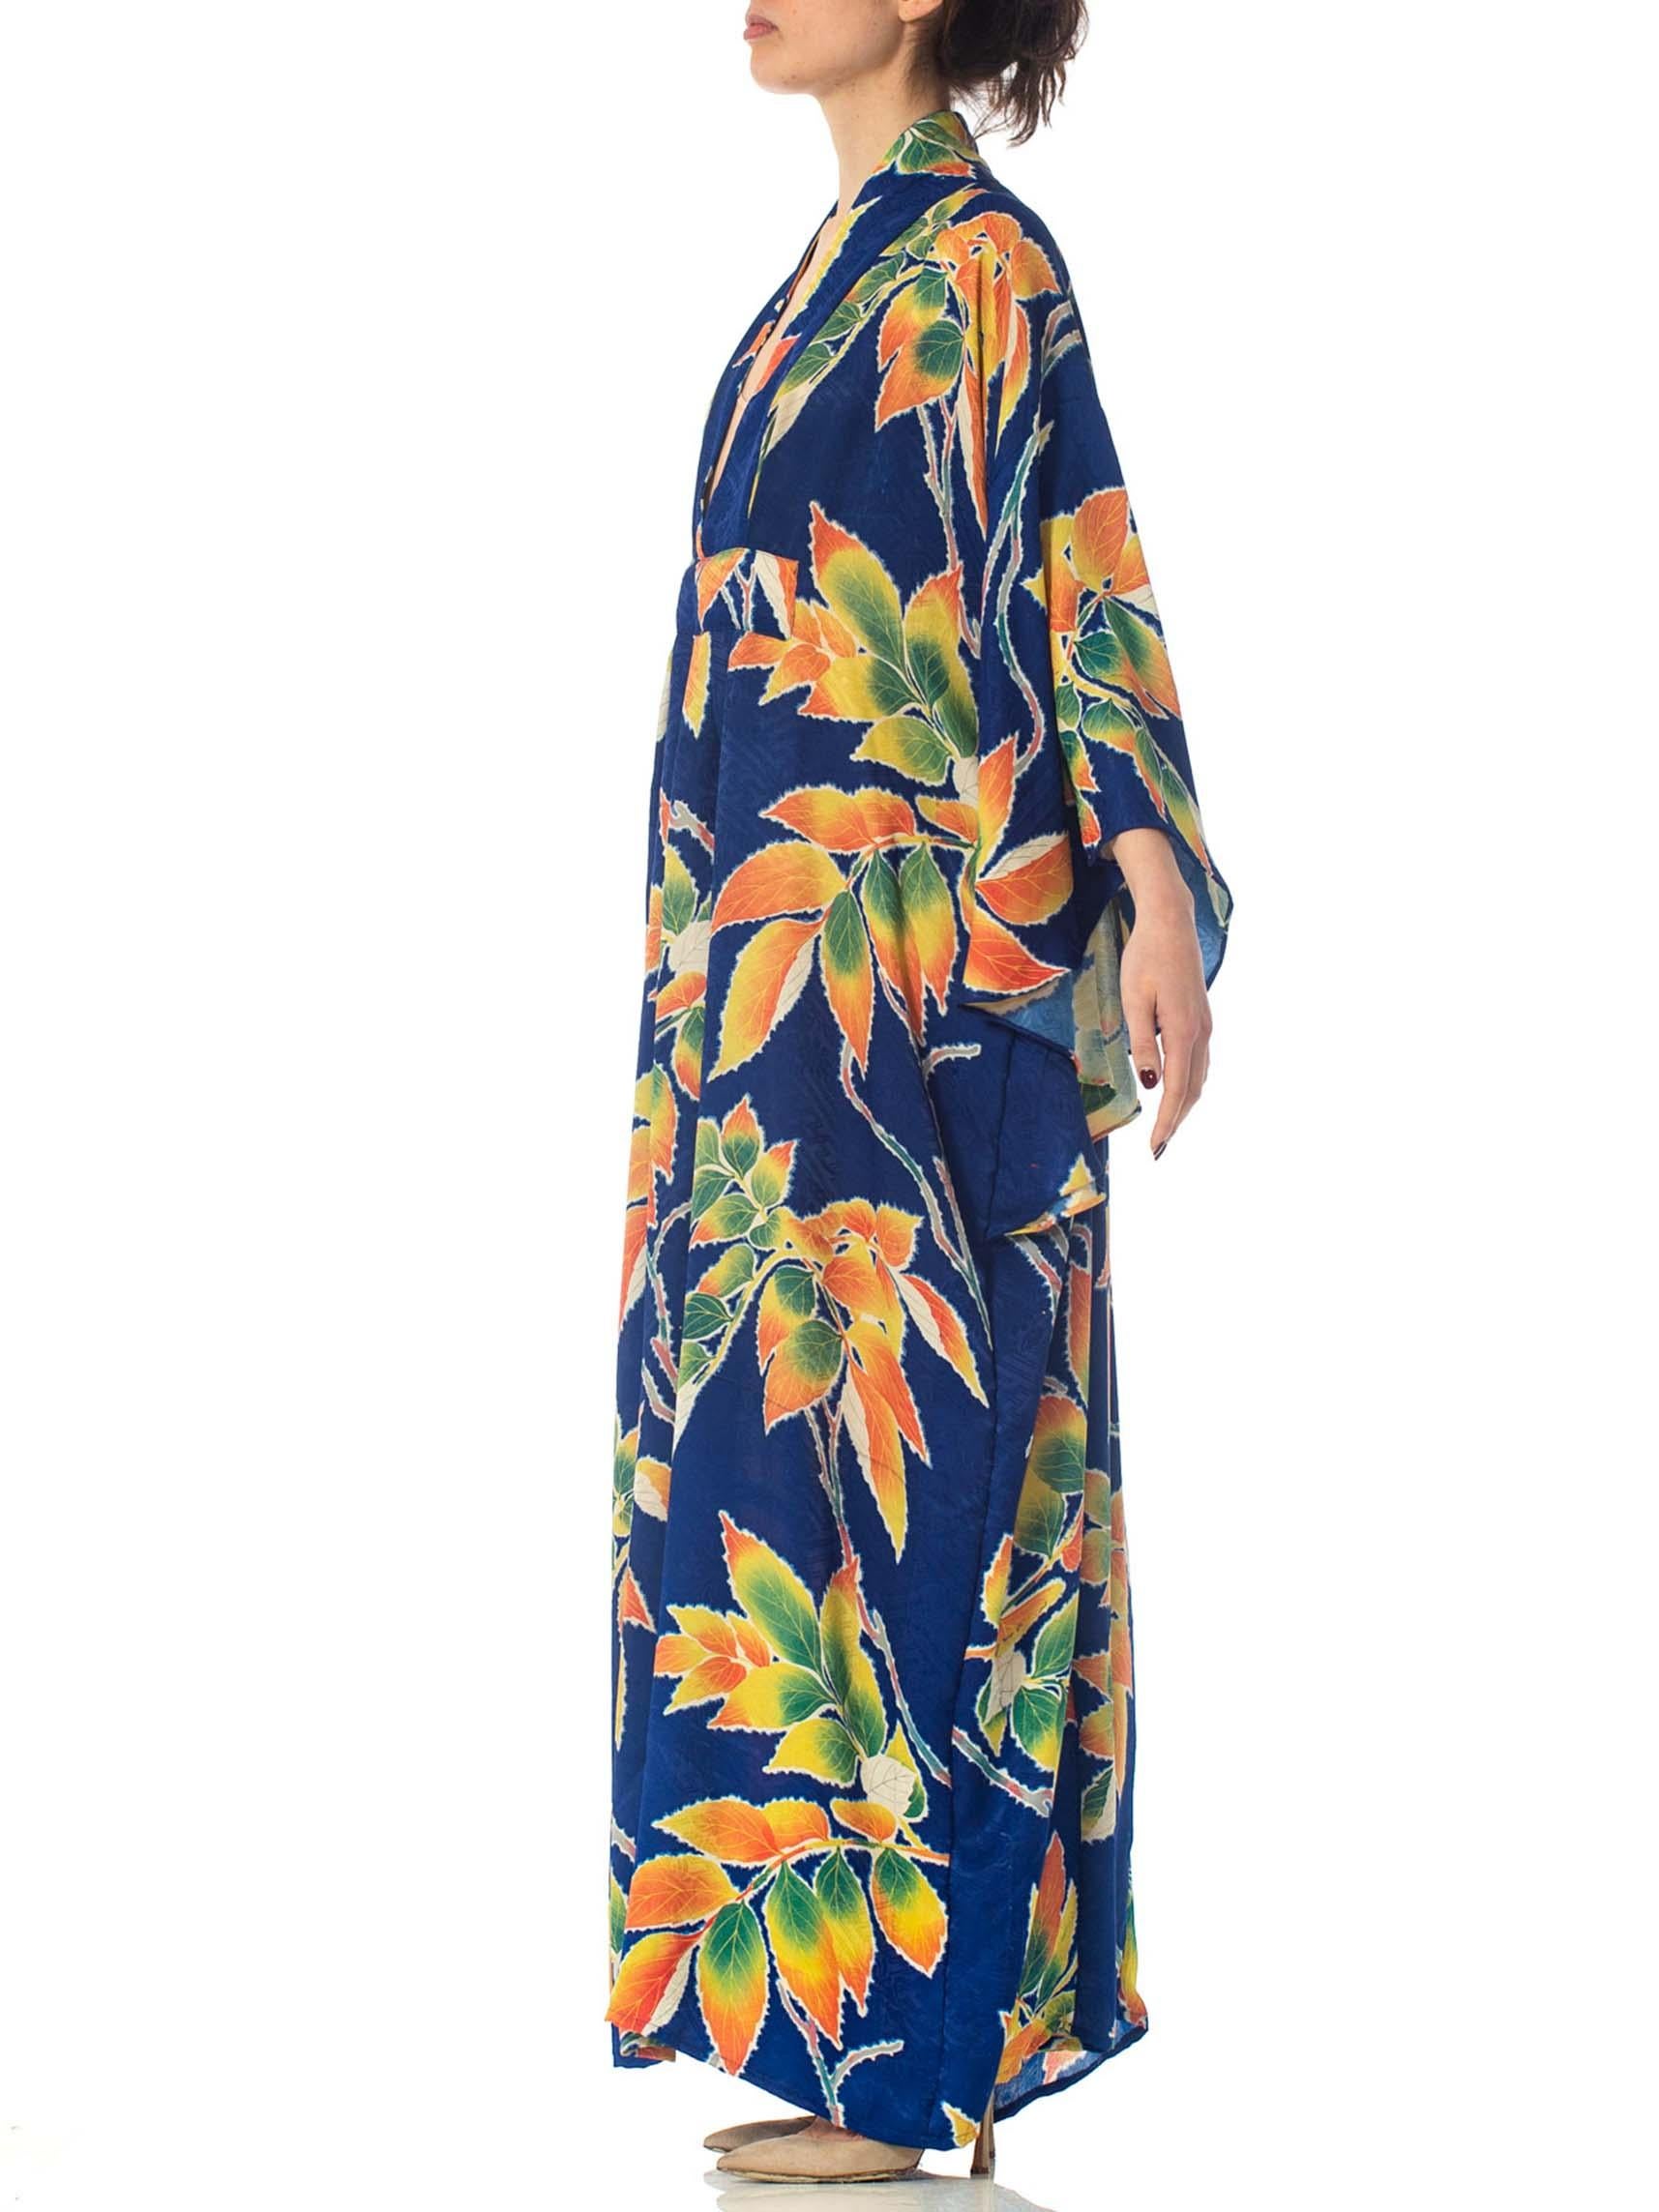 MORPHEW COLLECTION Indigo Blue Tropical Floral Silk Kaftan Made From Vintage Ja In Excellent Condition For Sale In New York, NY